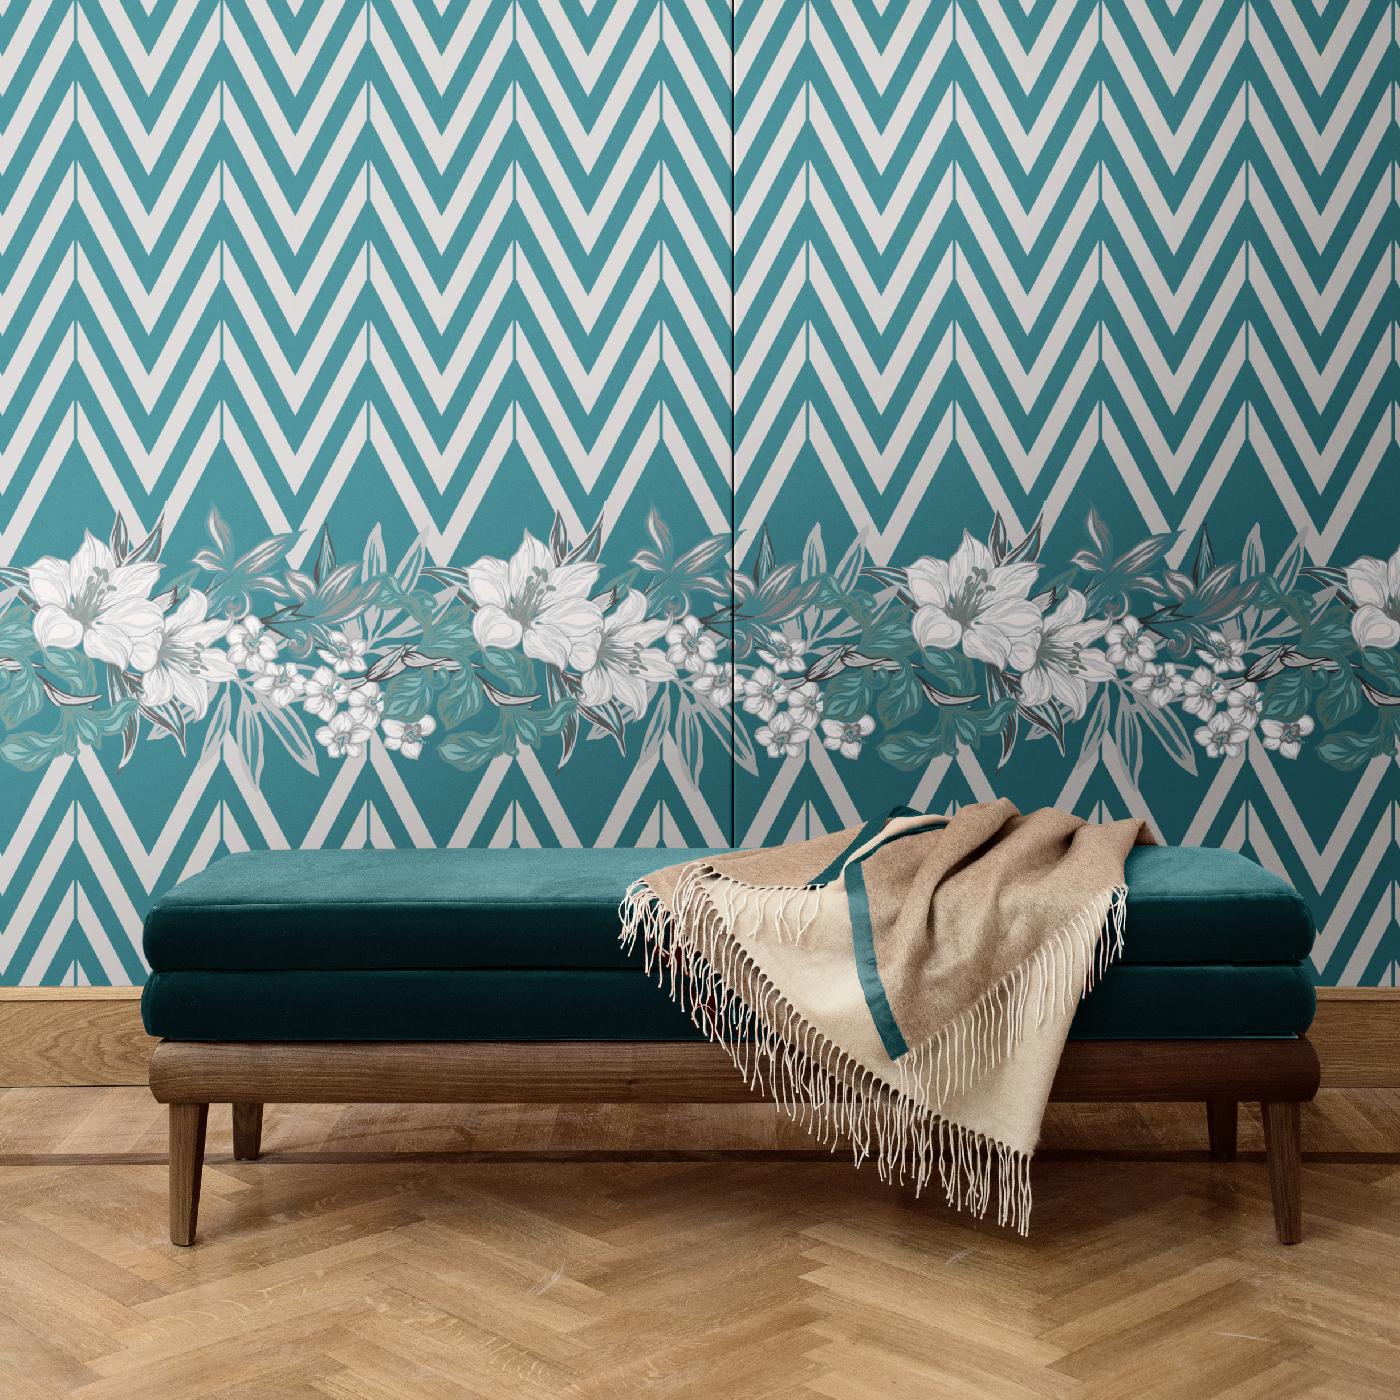 Mesmerizing and dynamic, this elegant wall covering is part of the Flowers and Chevron collection, clearly named after the two distinctive and contrasting patterns: one geometric and bold, the other delicate and romantic. This piece was crafted of